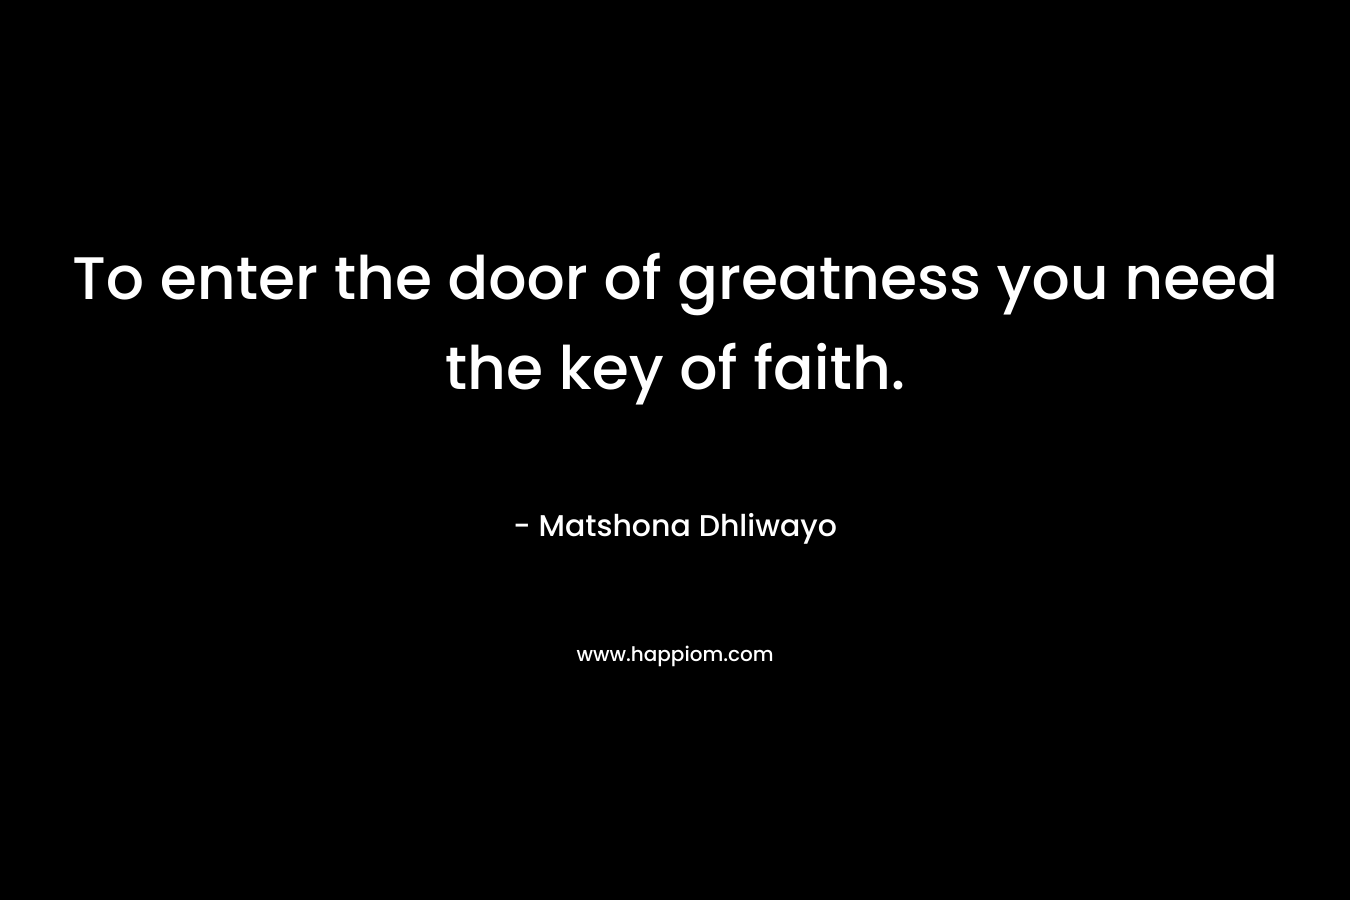 To enter the door of greatness you need the key of faith.